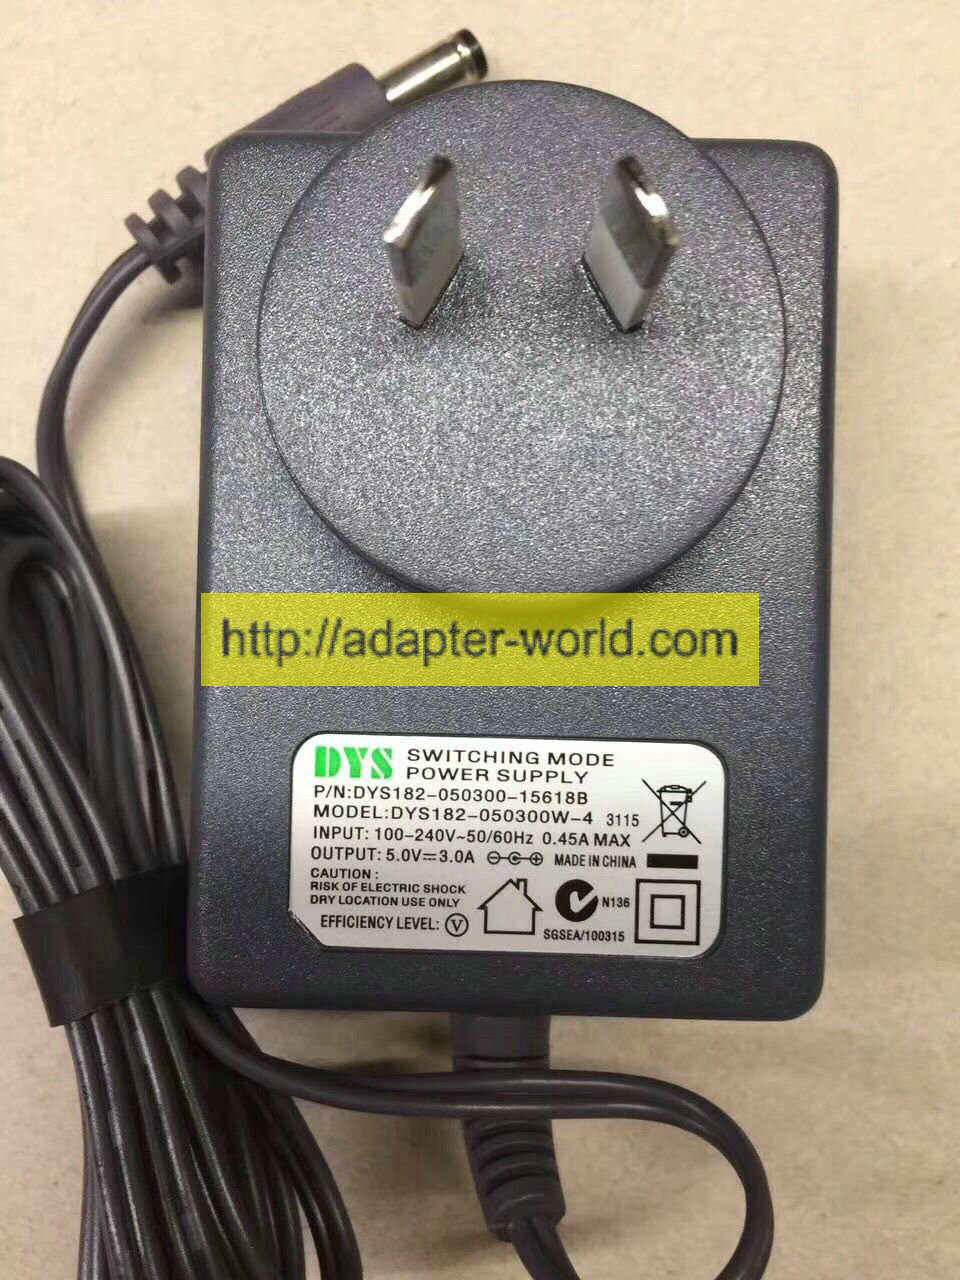 *100% Brand NEW* DYS DYS182-050300W-4 3115 DYS182-050300-15618B 5.0V--3.0A AC/DC Adapter Power Adapter Free sh